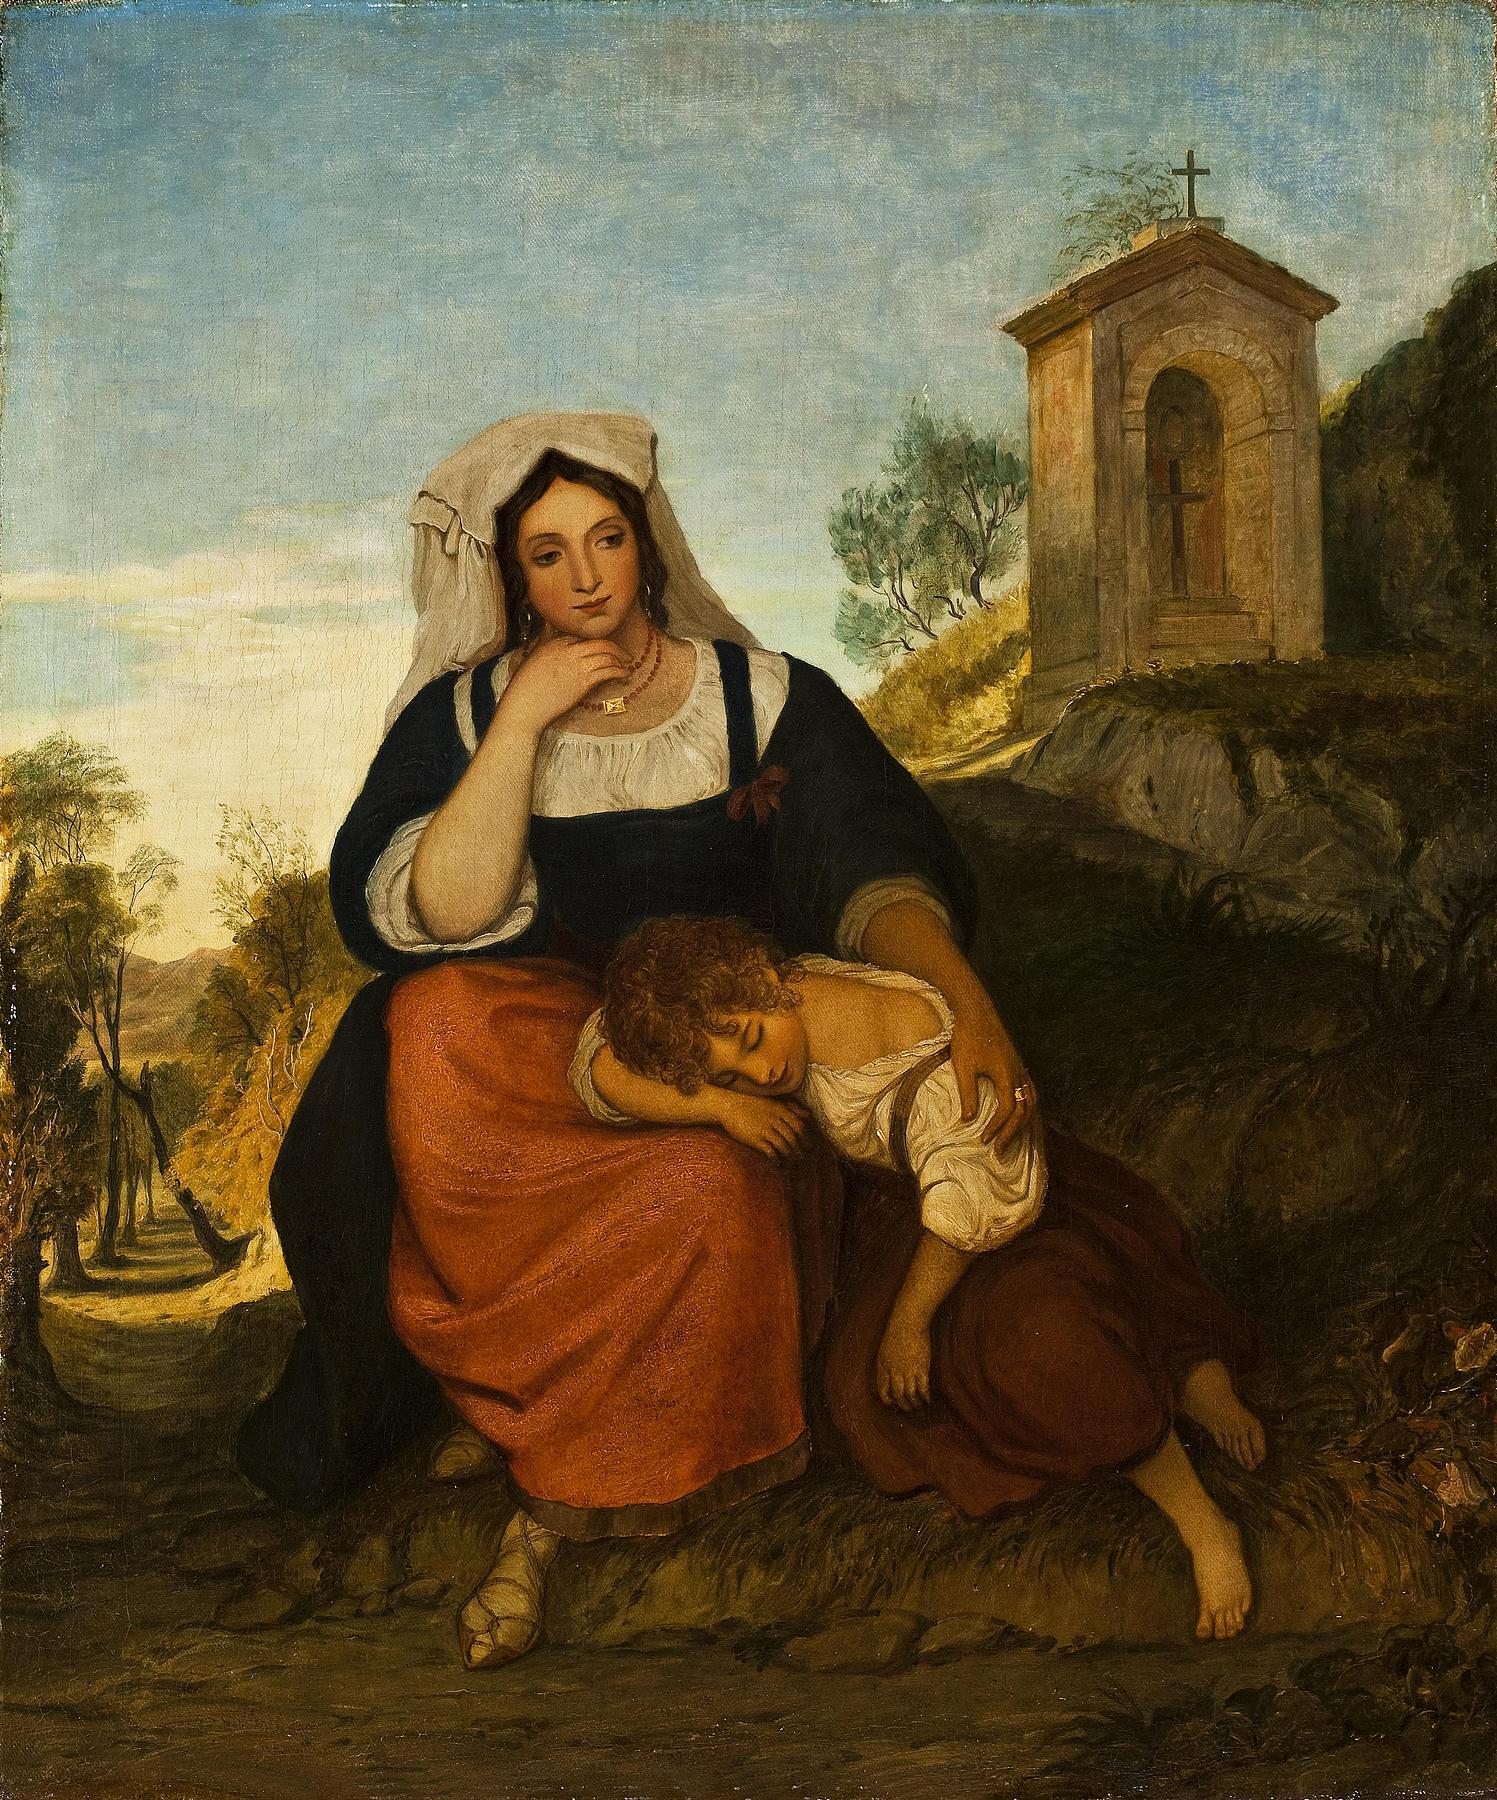 Italian Peasant Woman with Her Daughter, B99